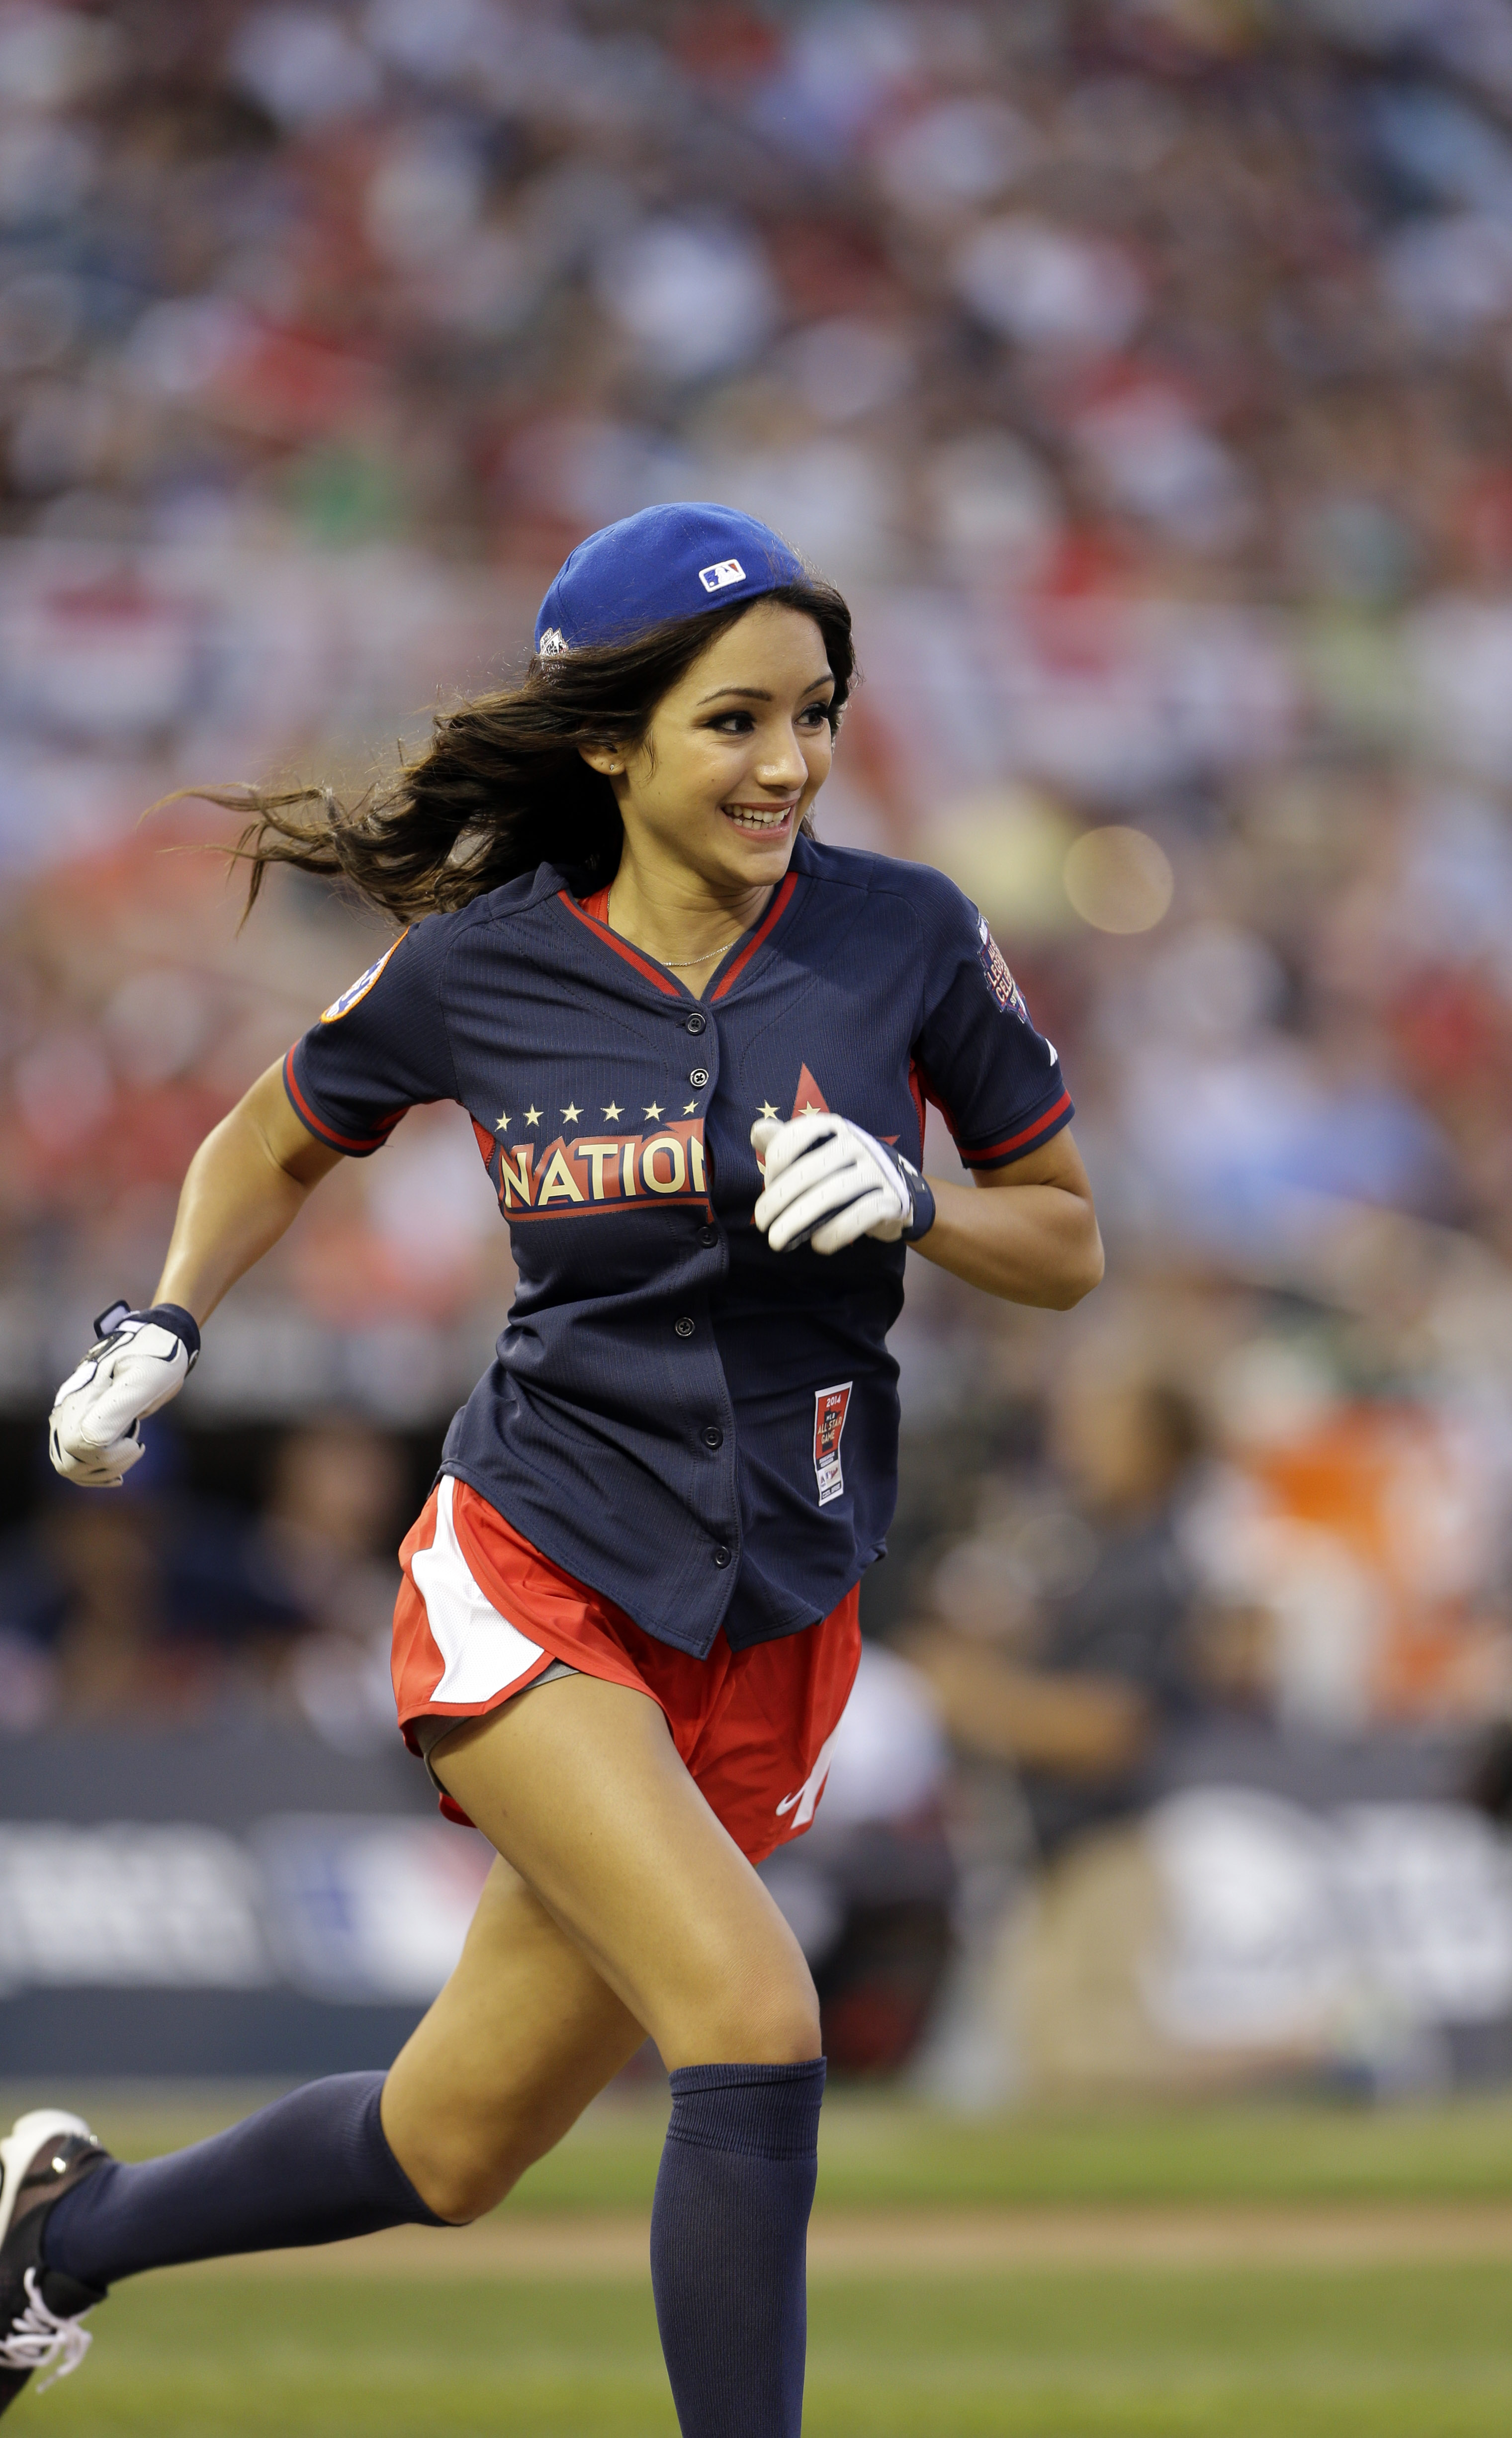 2014 All-Star Legends & Celebrity Softball Game - Sports Illustrated